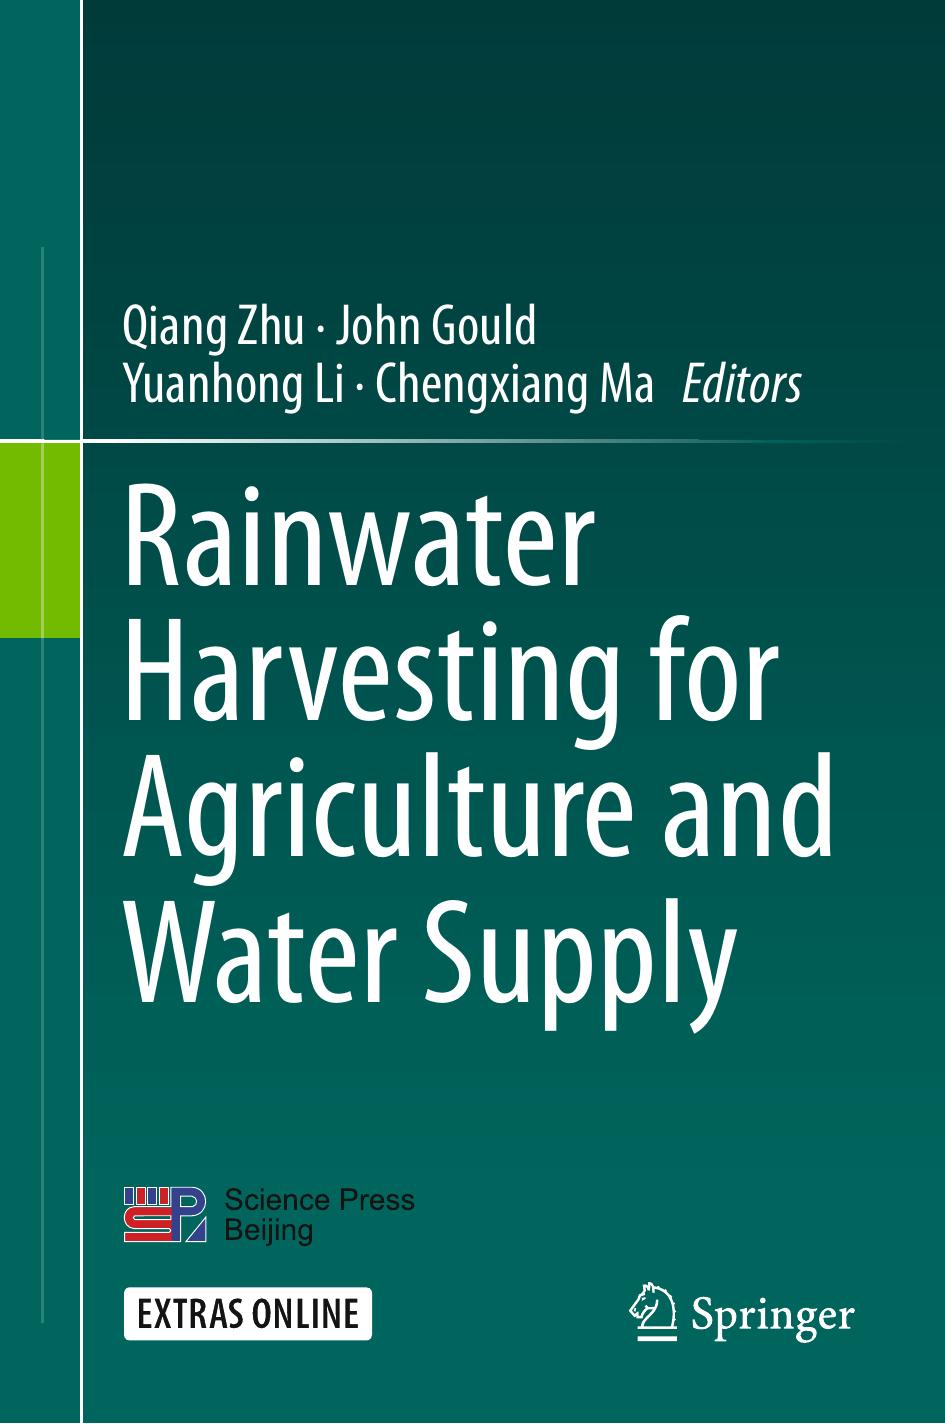 Rainwater Harvesting for Agriculture and Water Supply ( PDFDrive ), 2015